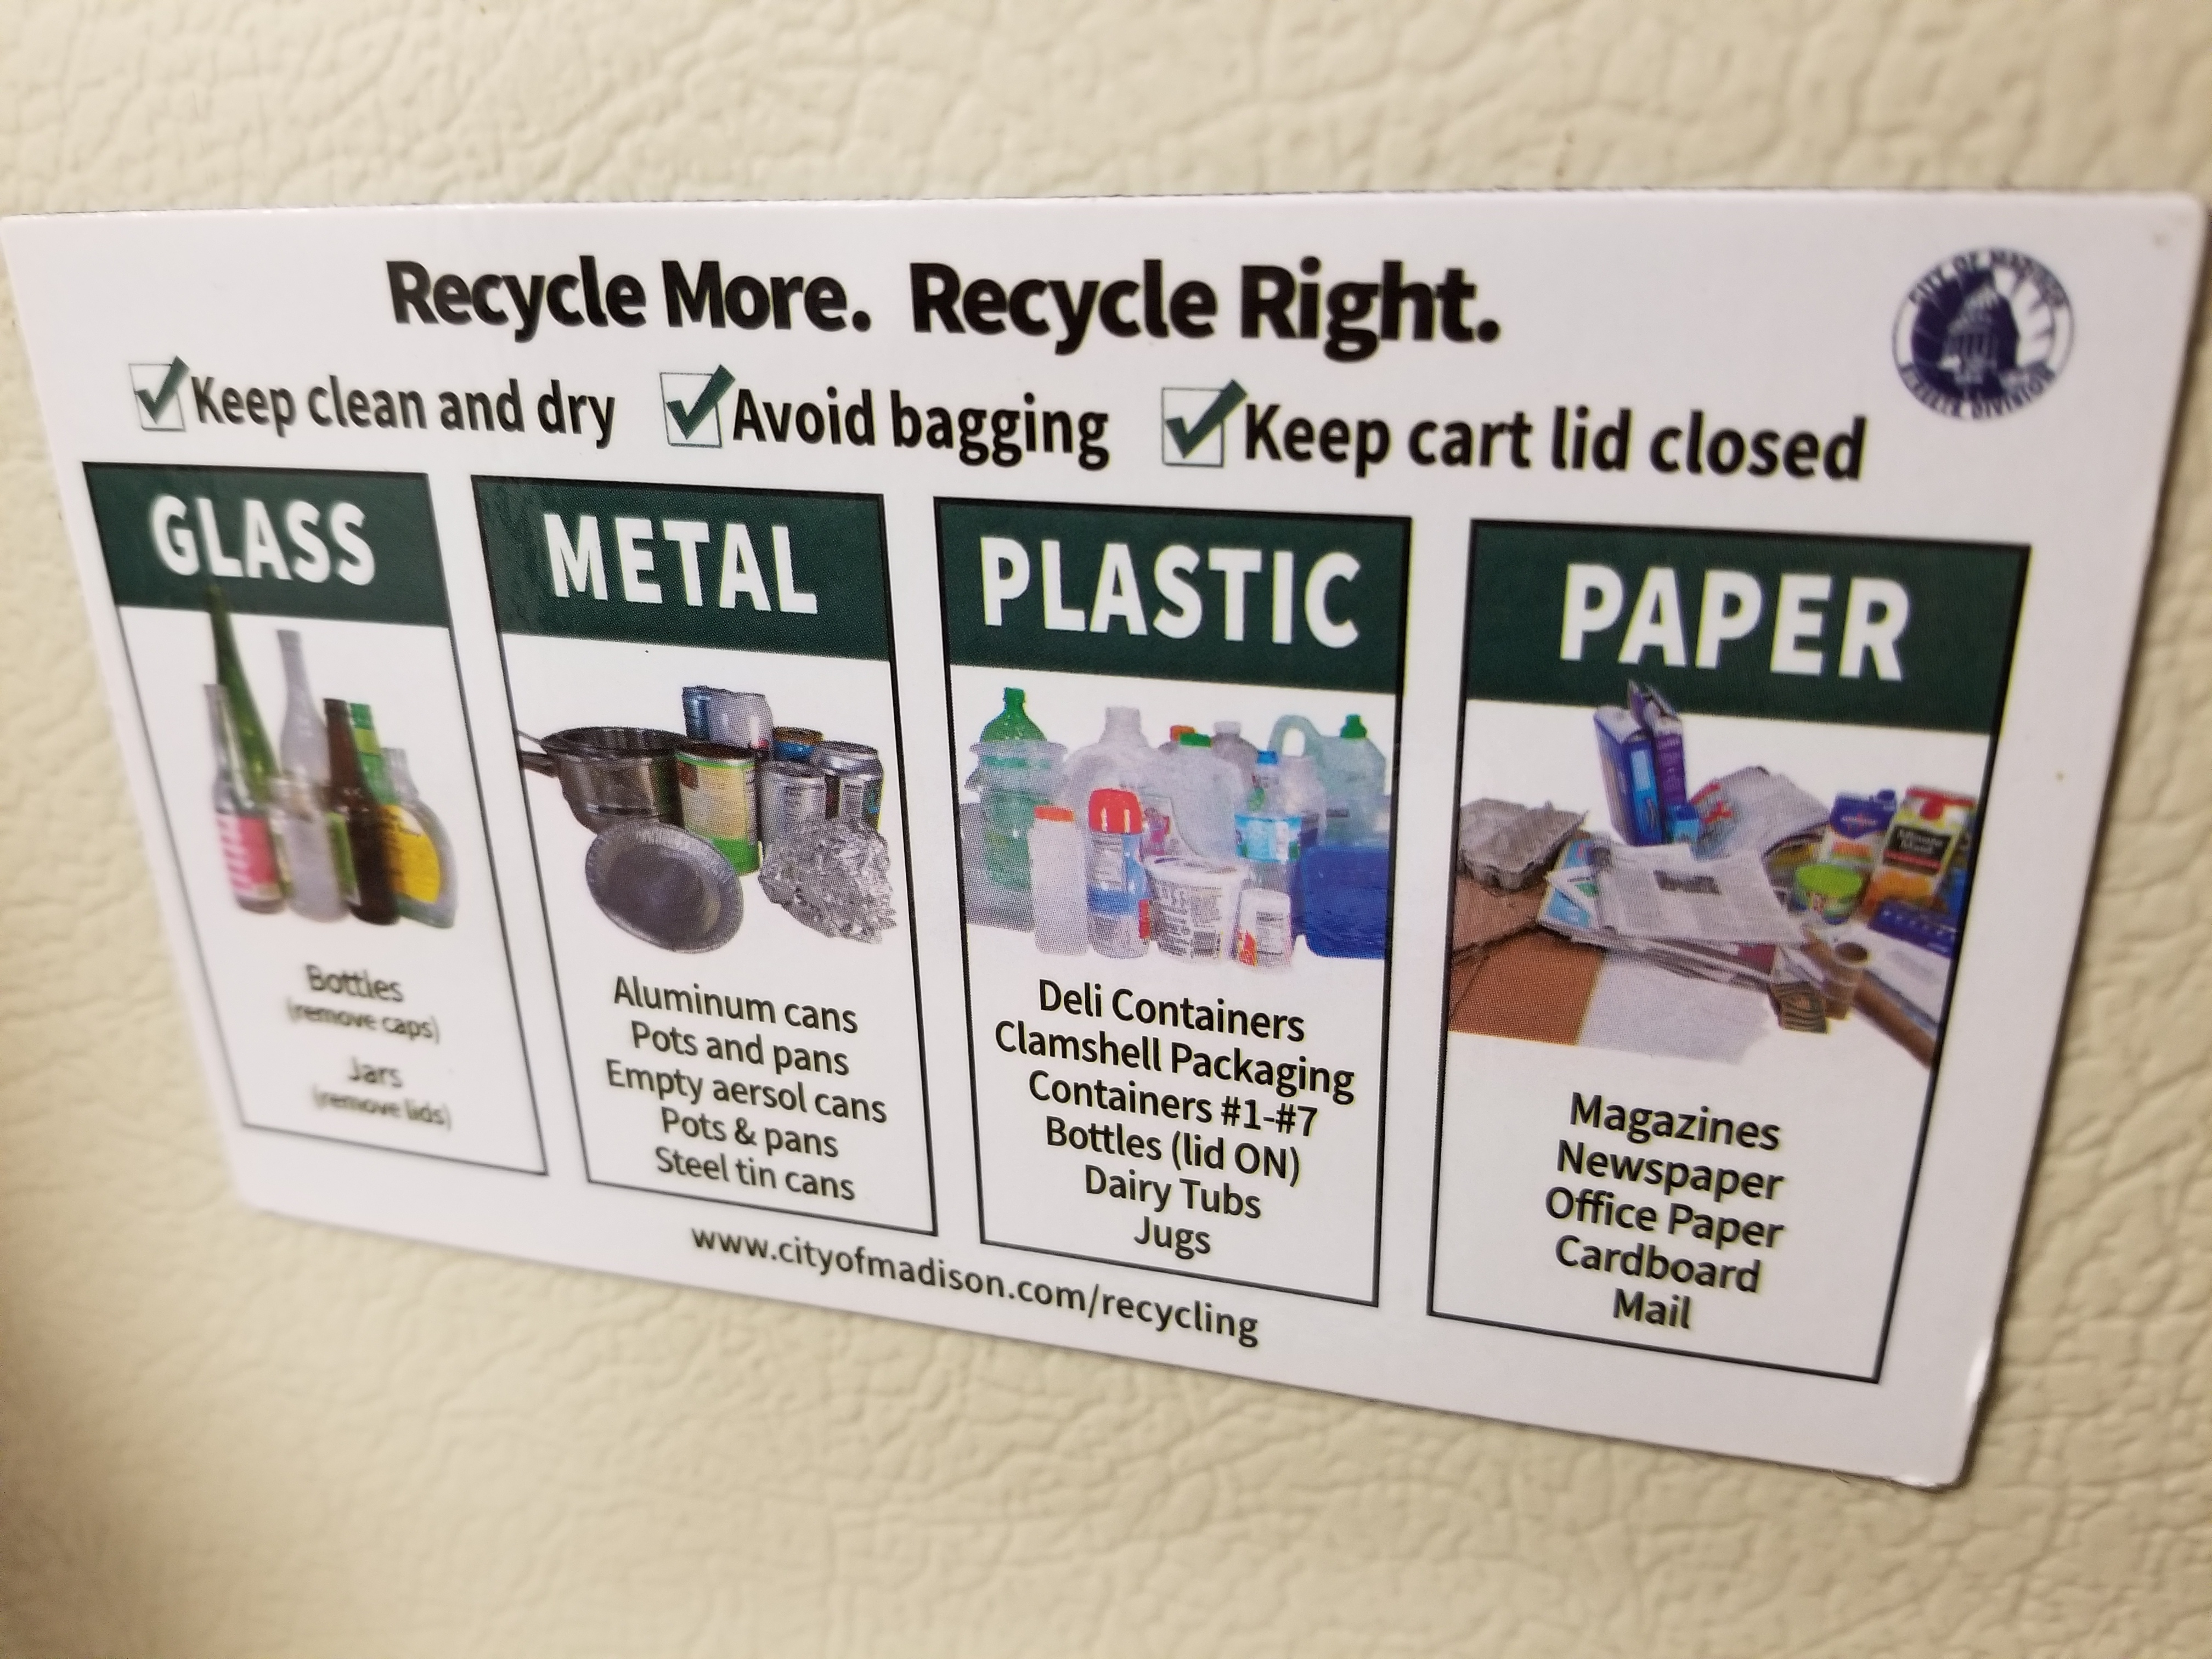 https://www.cityofmadison.com/streets/recycling/images/20191111_135630.jpg